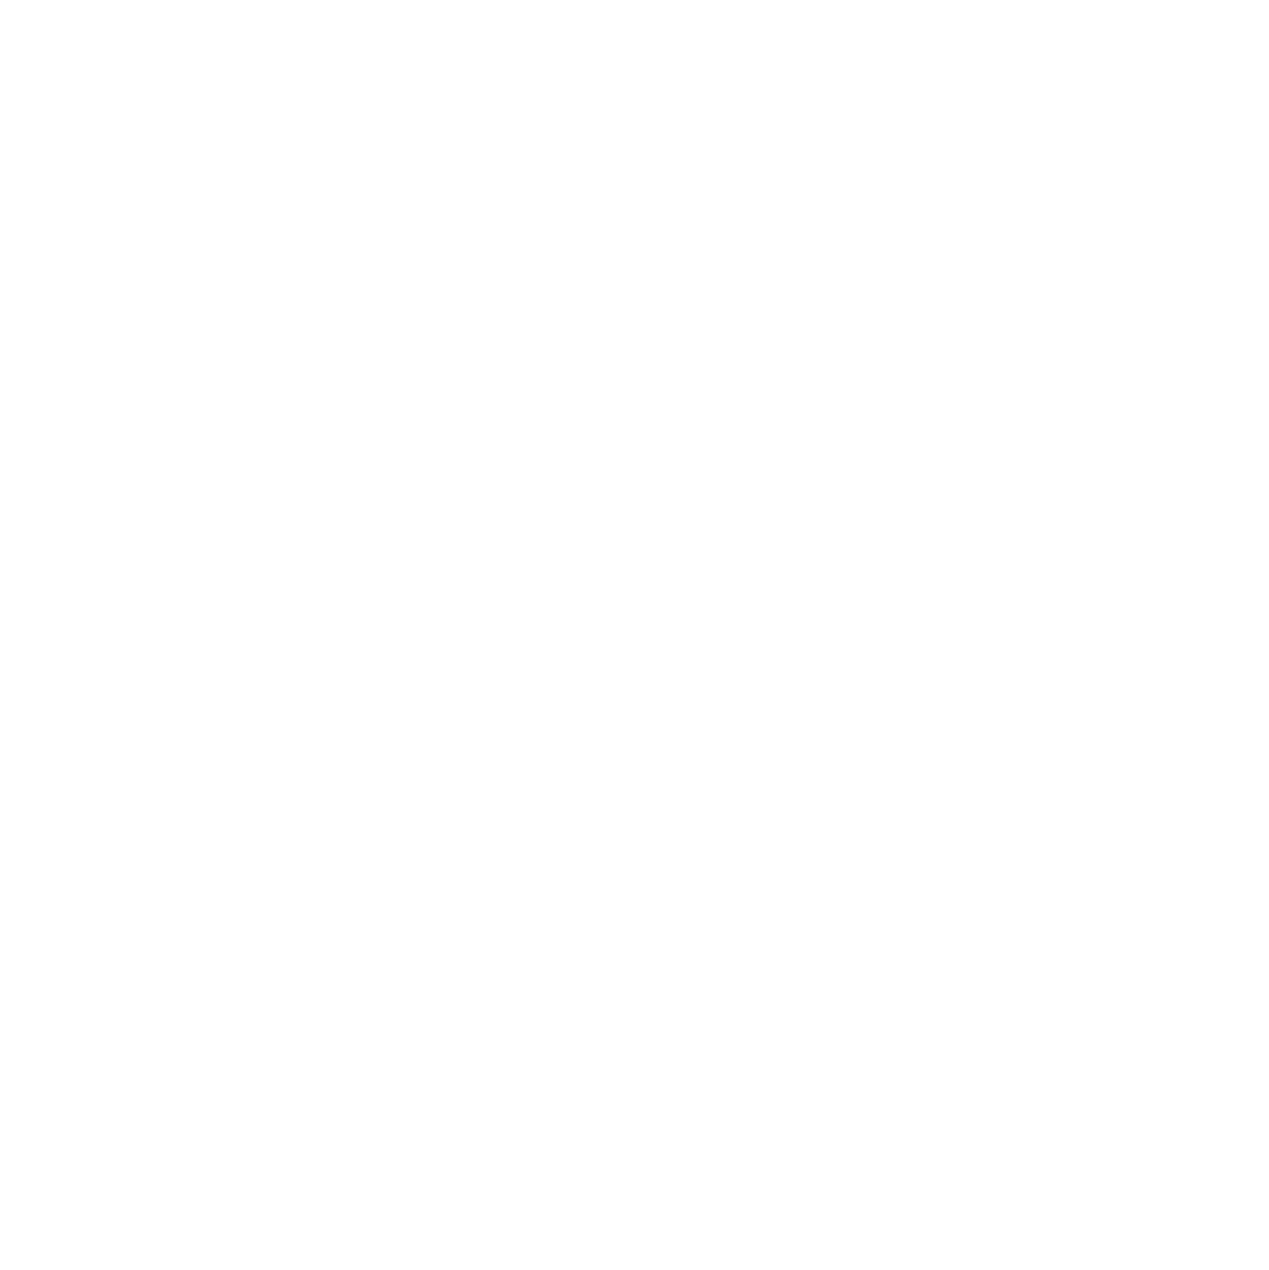 LDYM | Louisiana District Youth Ministries UPCI